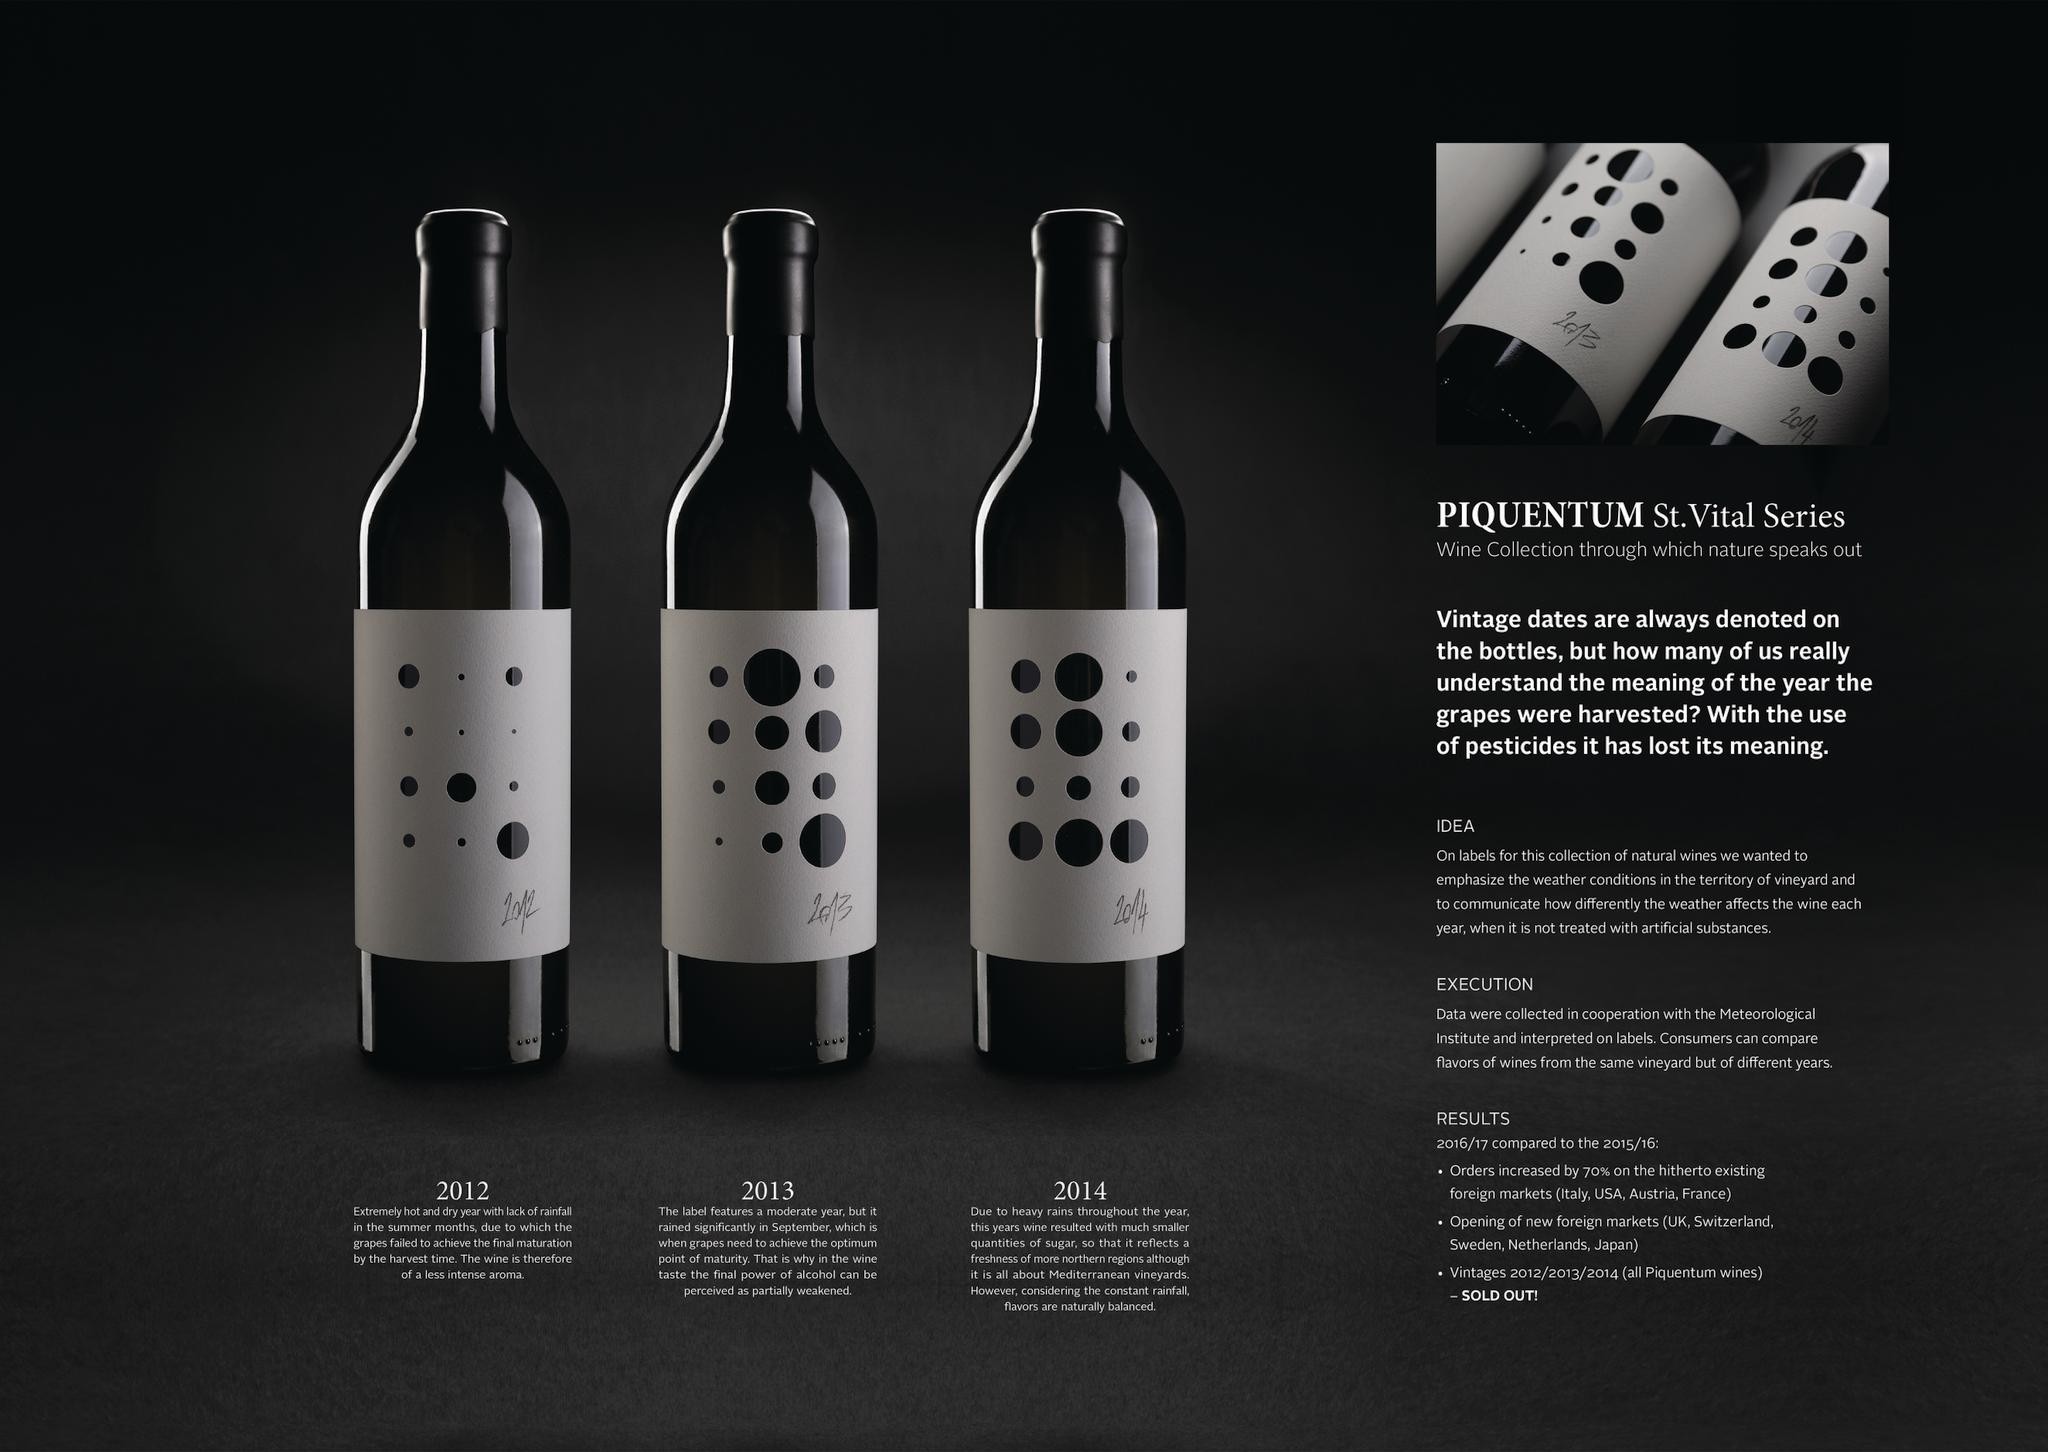 Piquentum St. Vital Series - Wine Collection through which nature speaks out 